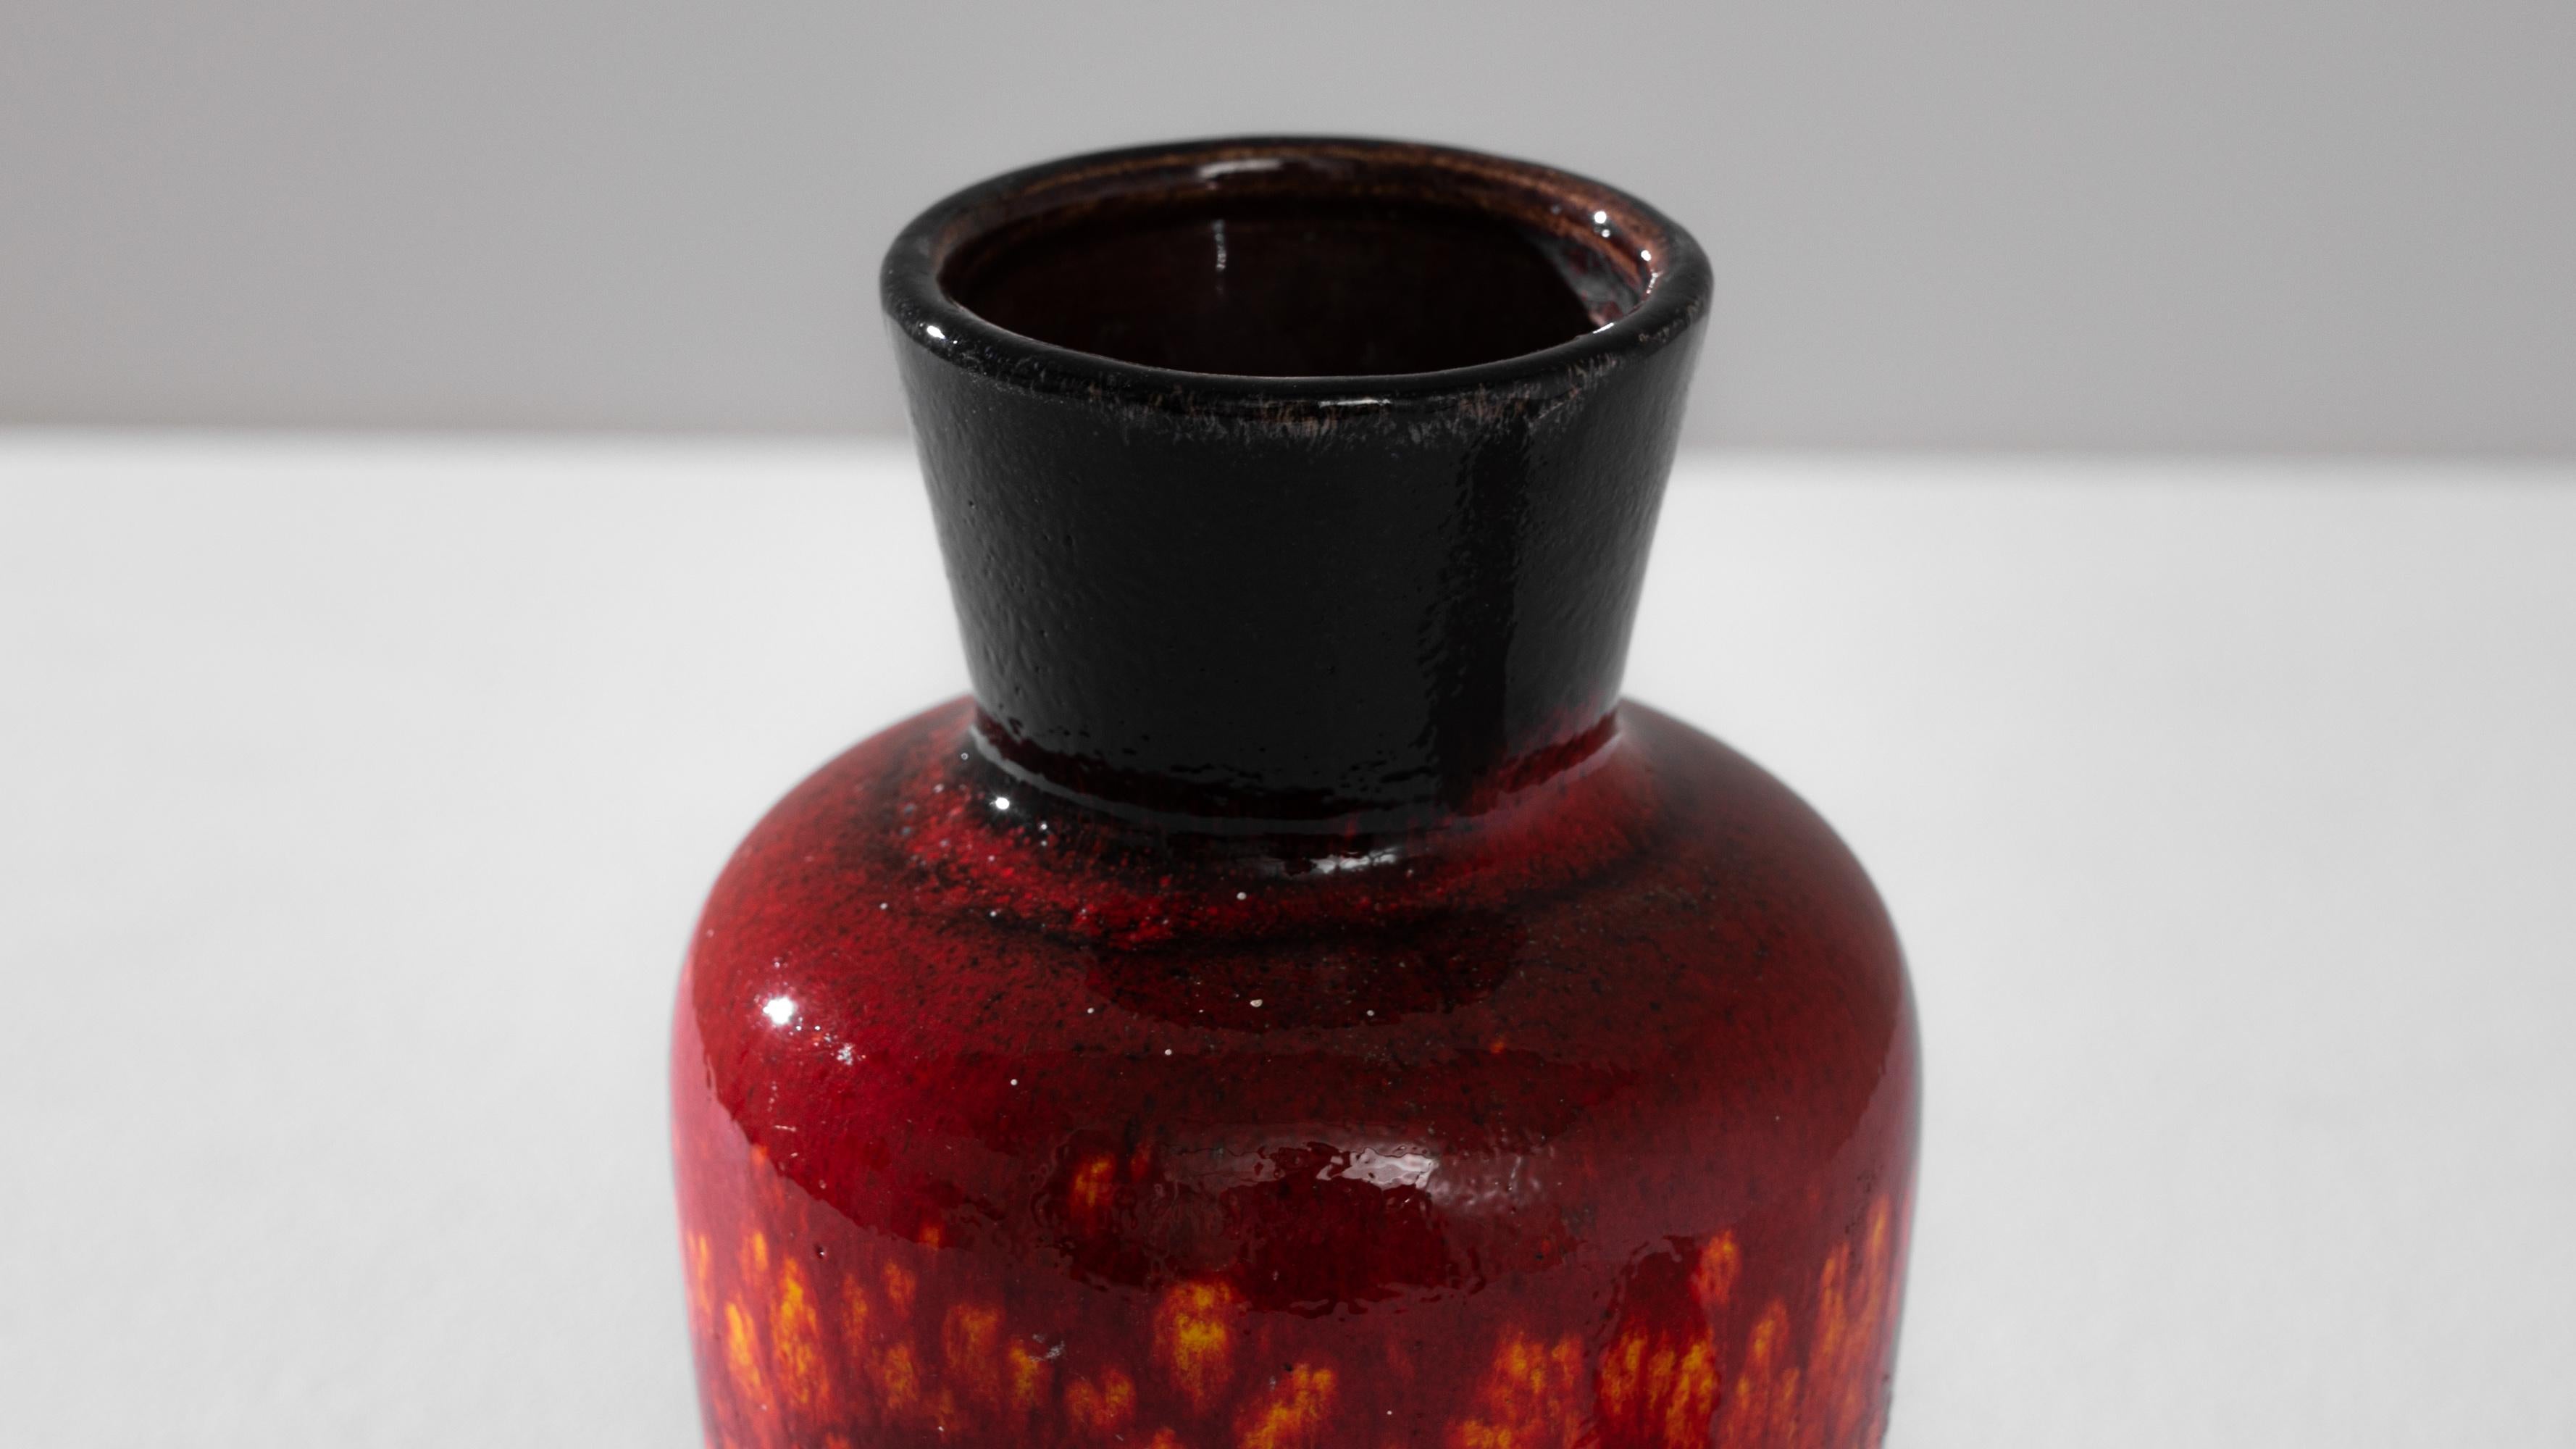 This striking 1960s German ceramic vase is a vibrant testament to the era's bold aesthetic and design ingenuity. The deep, fiery red glaze, speckled with intense bursts of yellow and black, makes a dramatic statement, while the sleek, minimalist